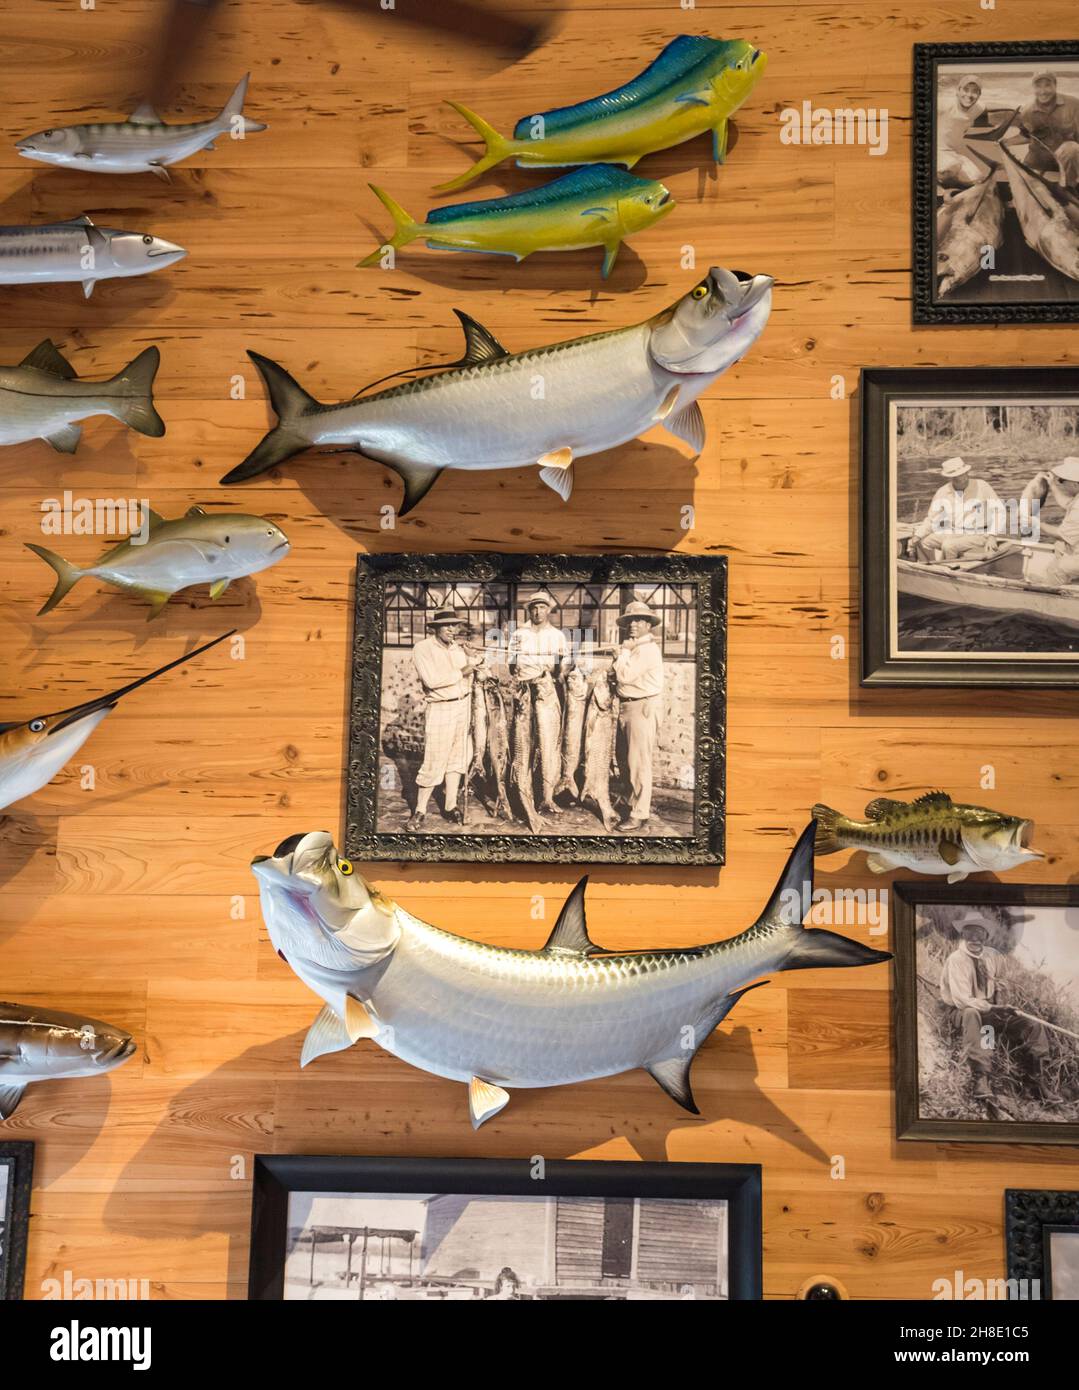 Fishing display complete with old photographs and mounted fish inside an outdoor recreation store in North Central Florida. Stock Photo